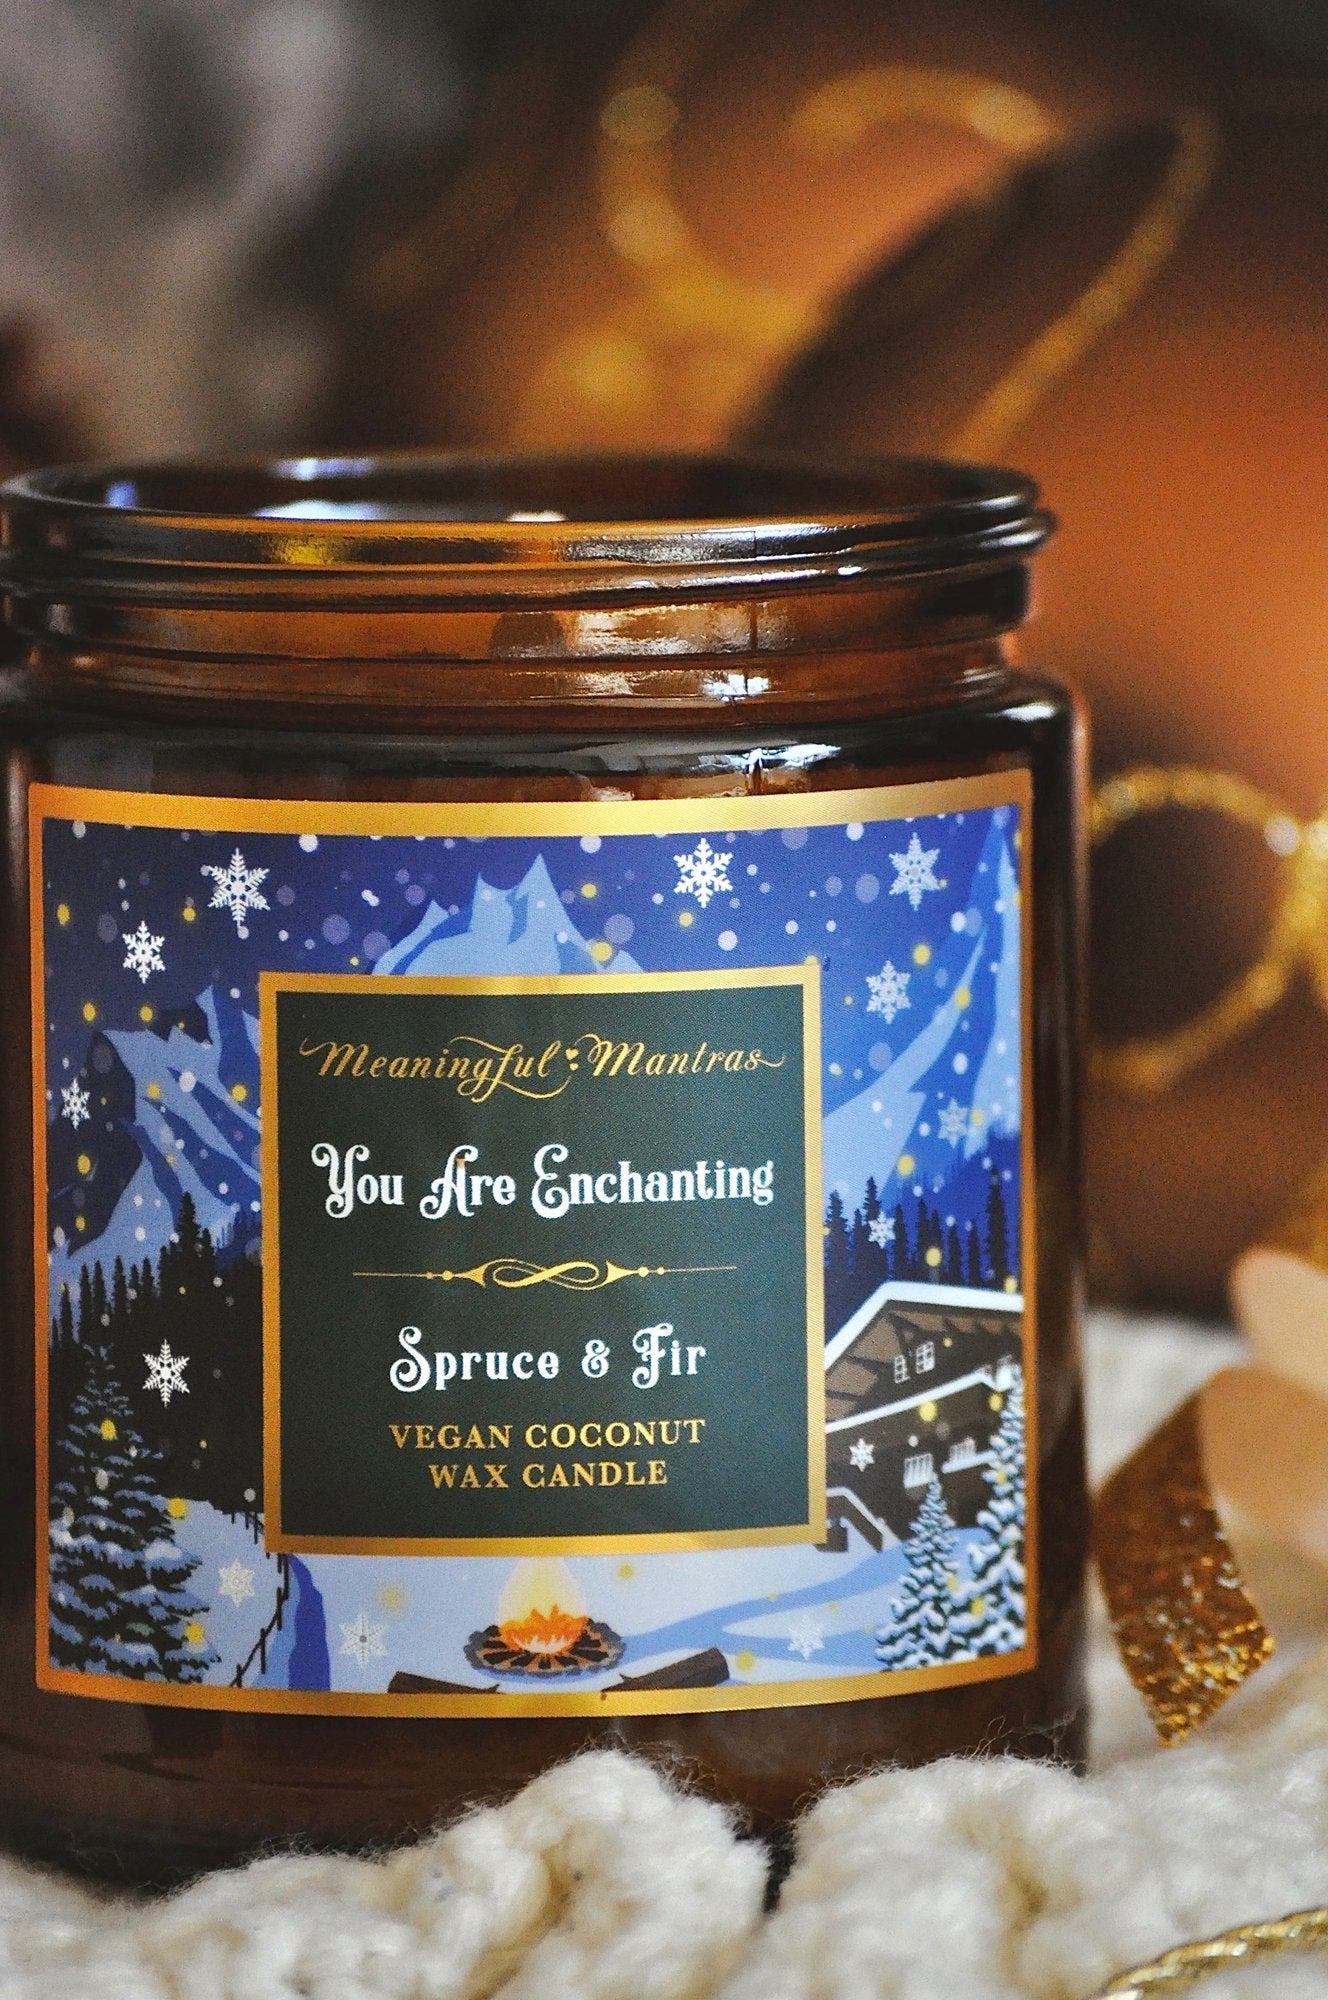 You Are Enchanting Spruce and Fir Candle